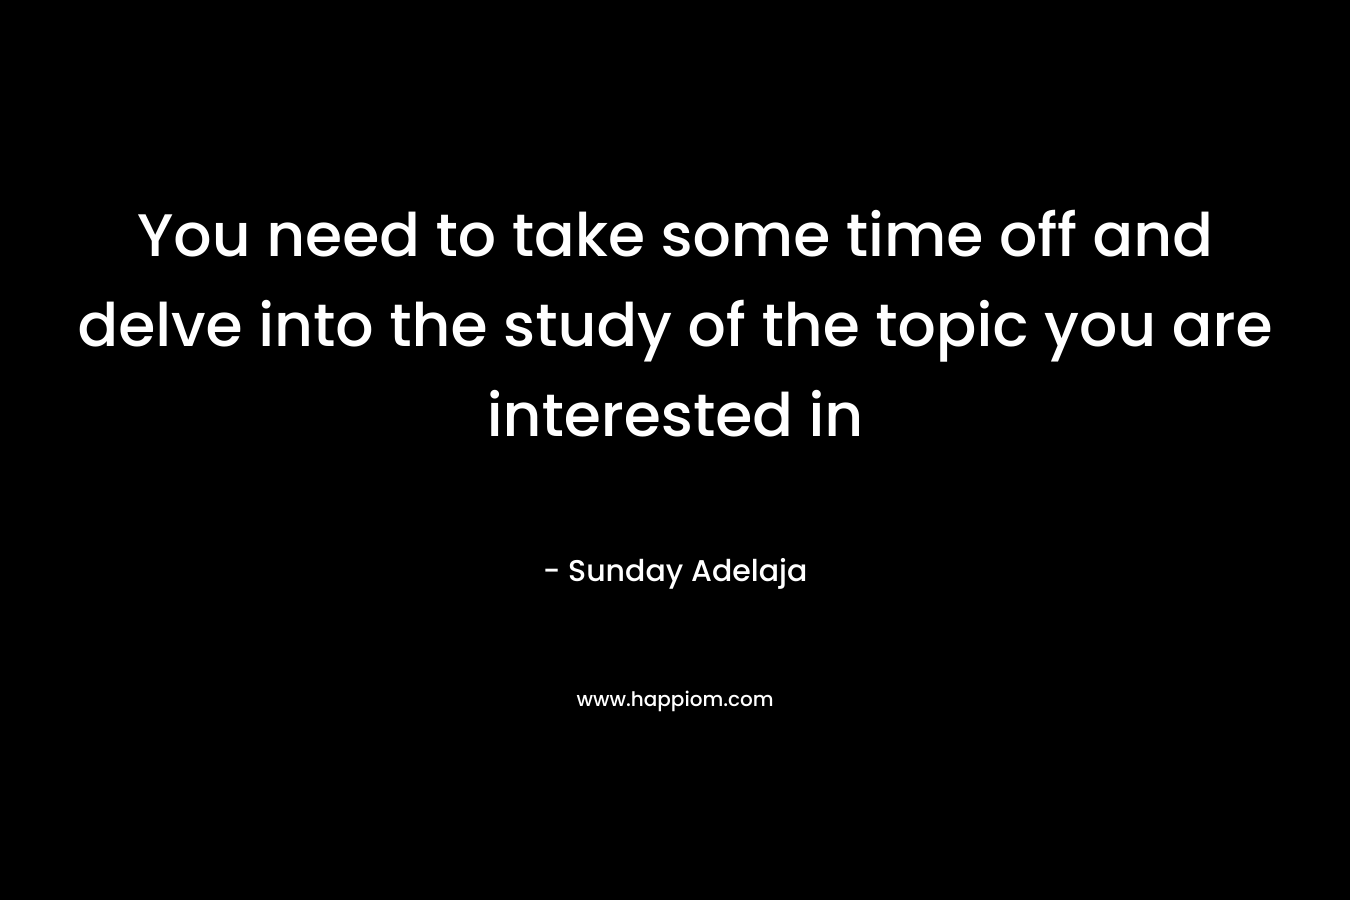 You need to take some time off and delve into the study of the topic you are interested in